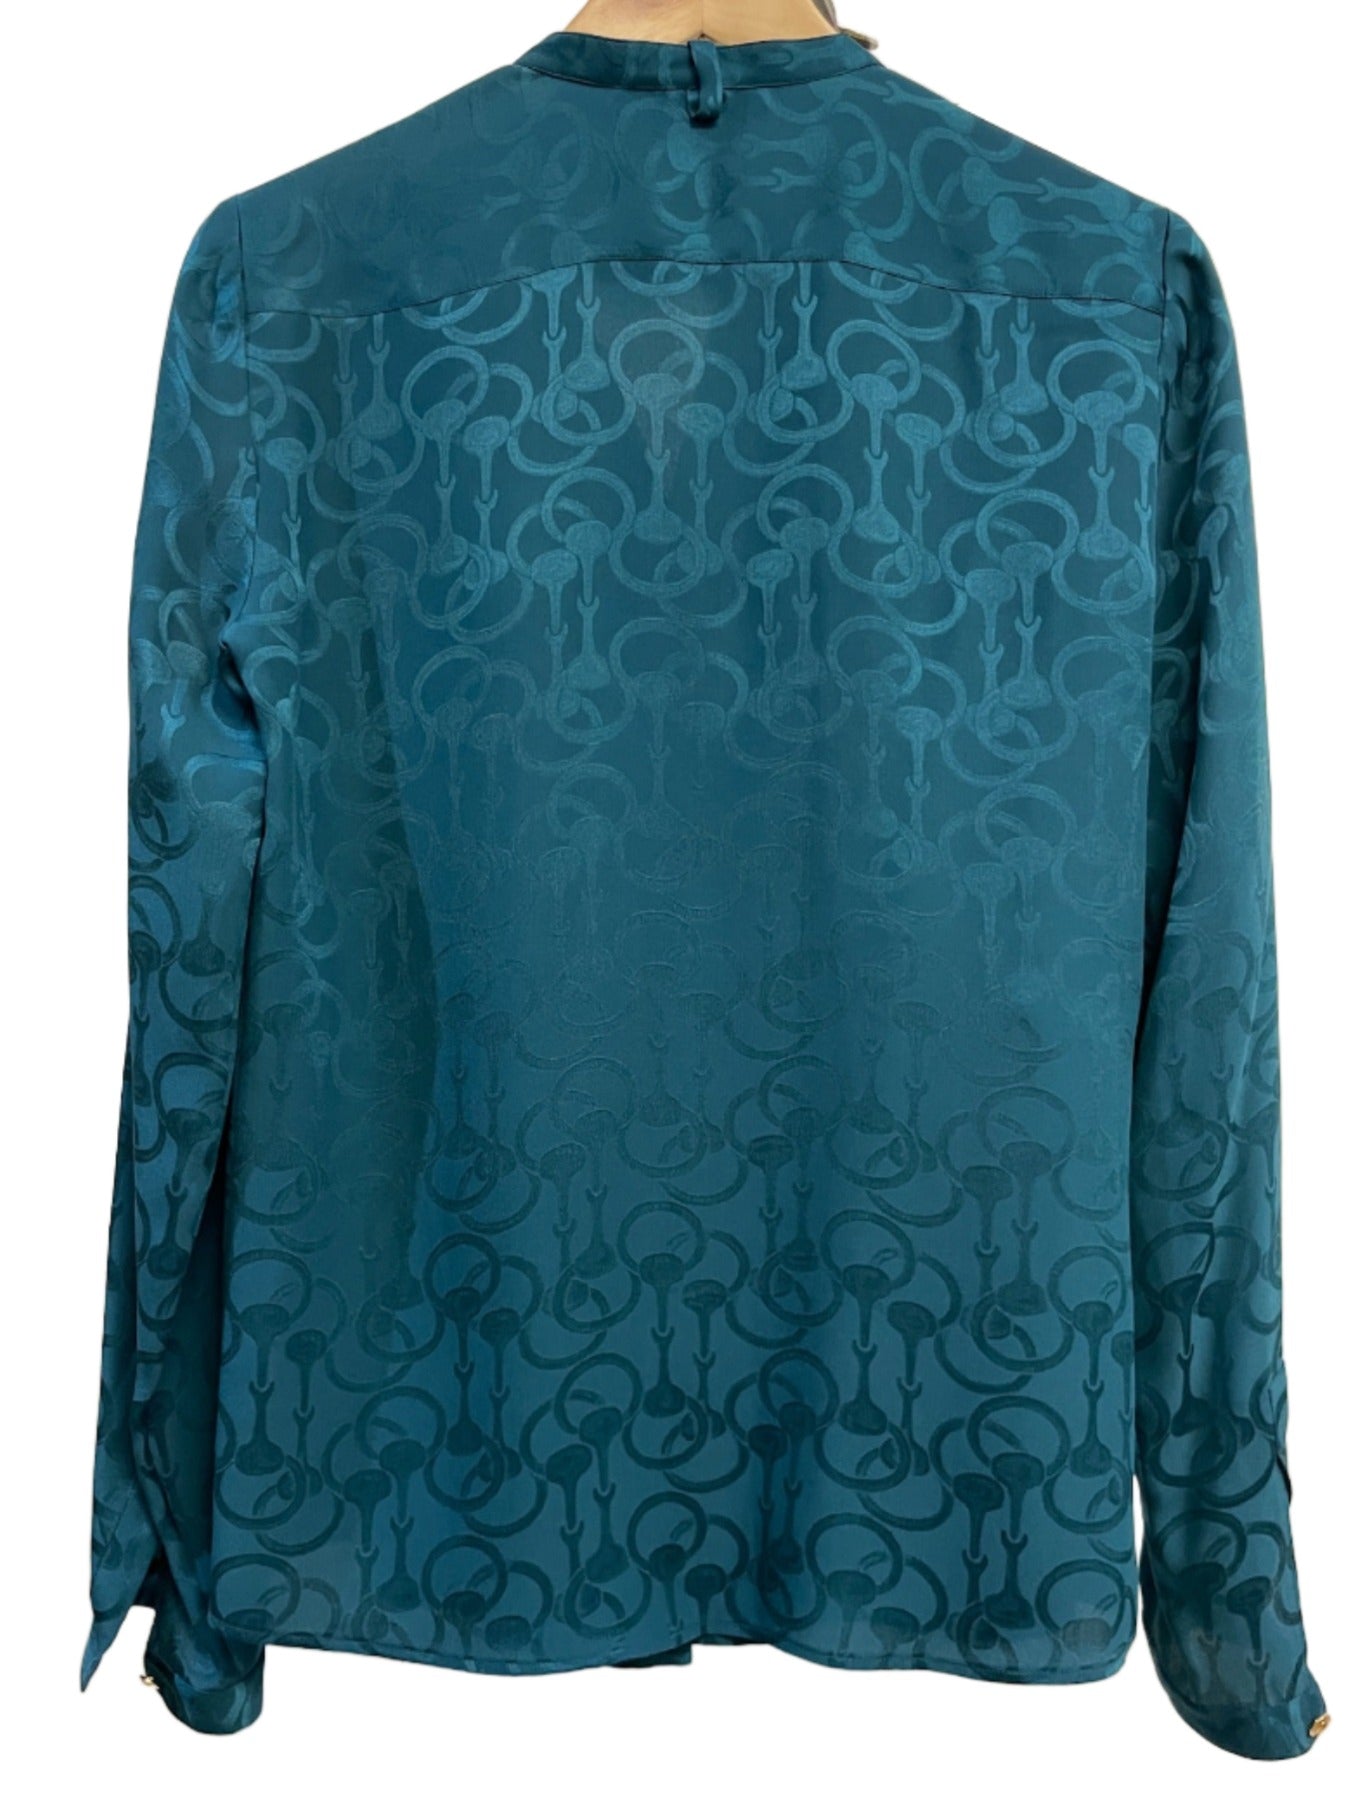 Gucci Teal Blouse